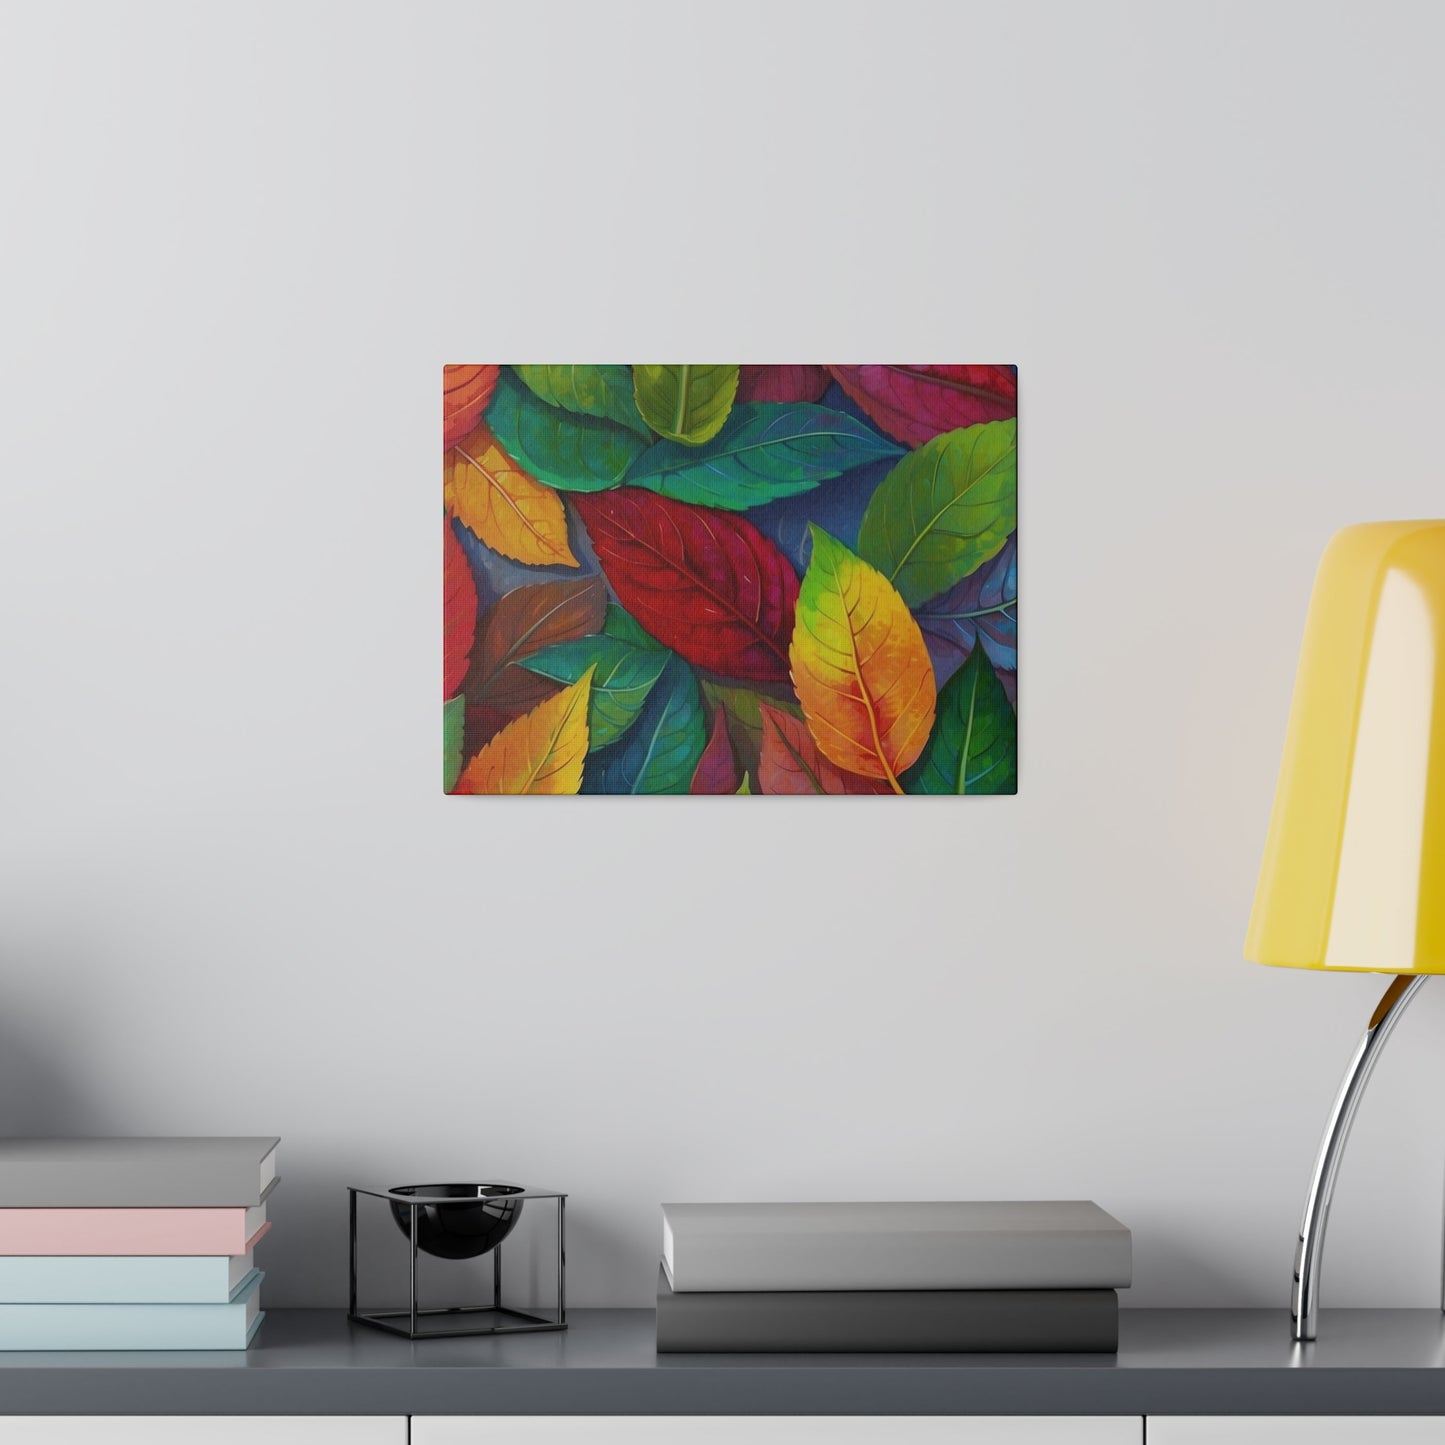 Colourful Leaves - Matte Canvas, Stretched, 0.75"